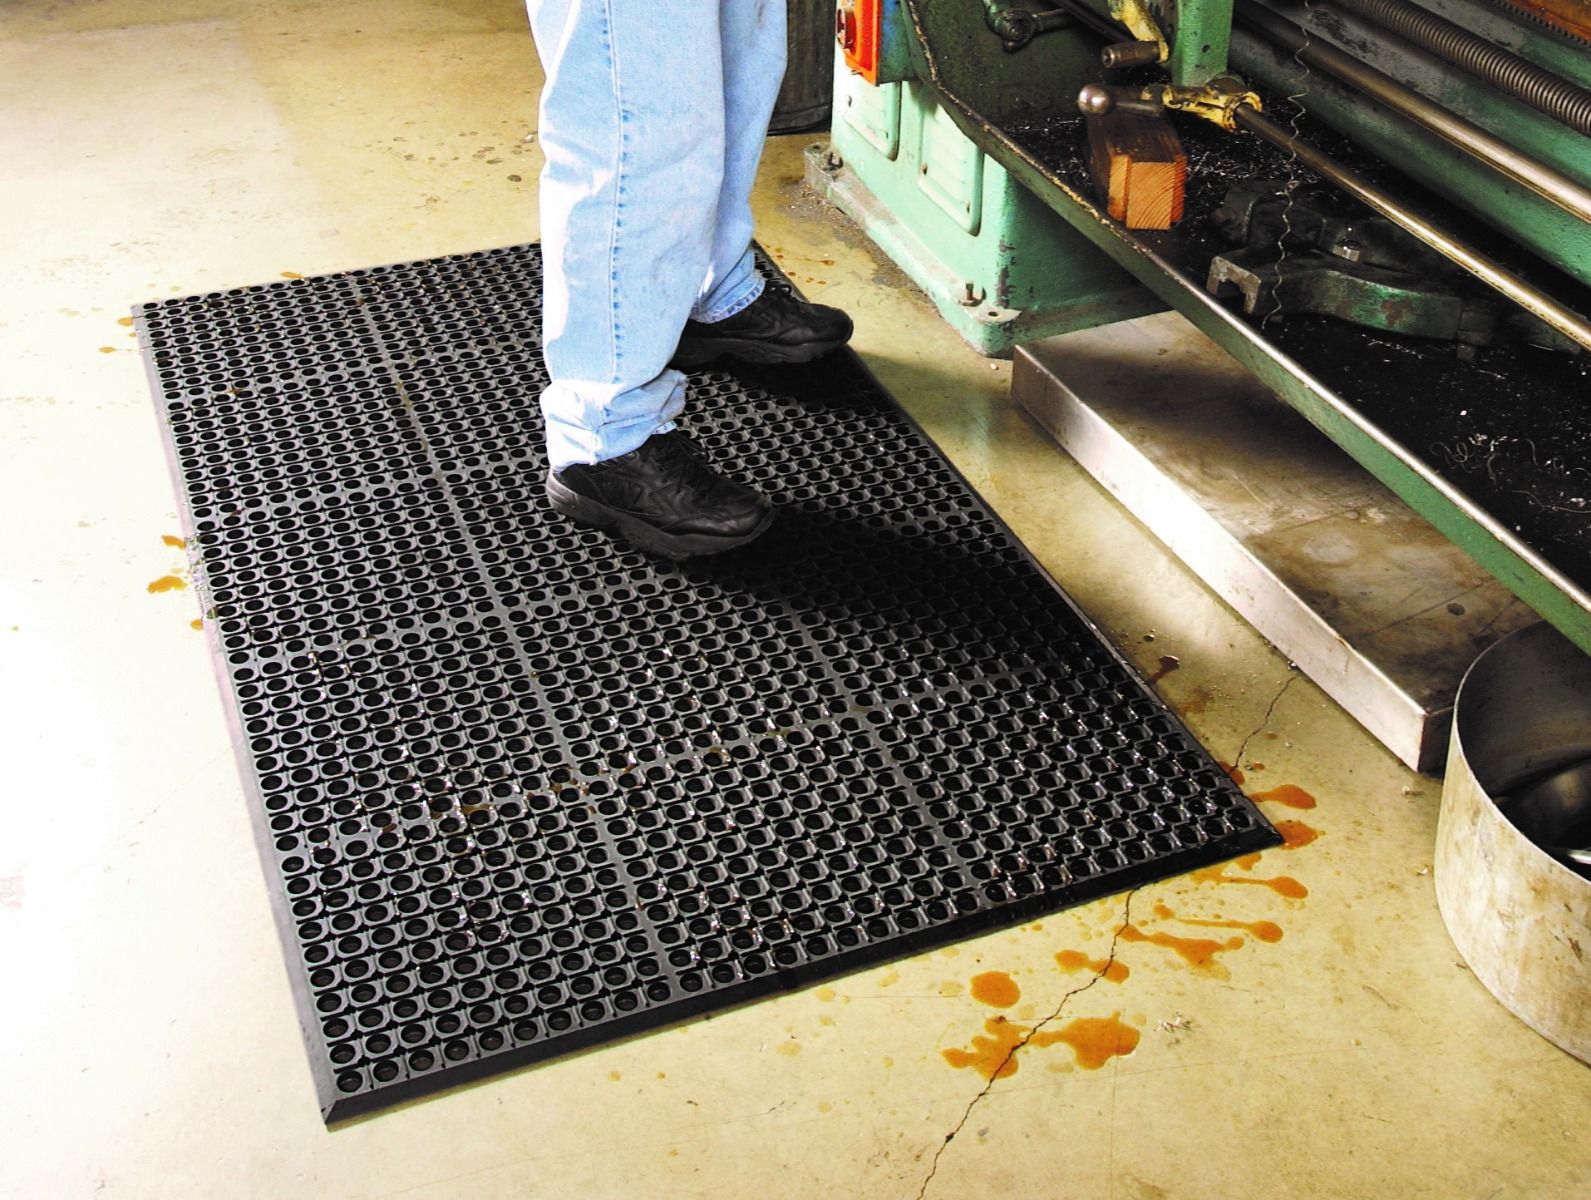 The Importance of Anti-Fatigue Mats  Ergonomic Flooring and Anti-fatigue  Floor Mats - Surface Pros Blog by Wearwell